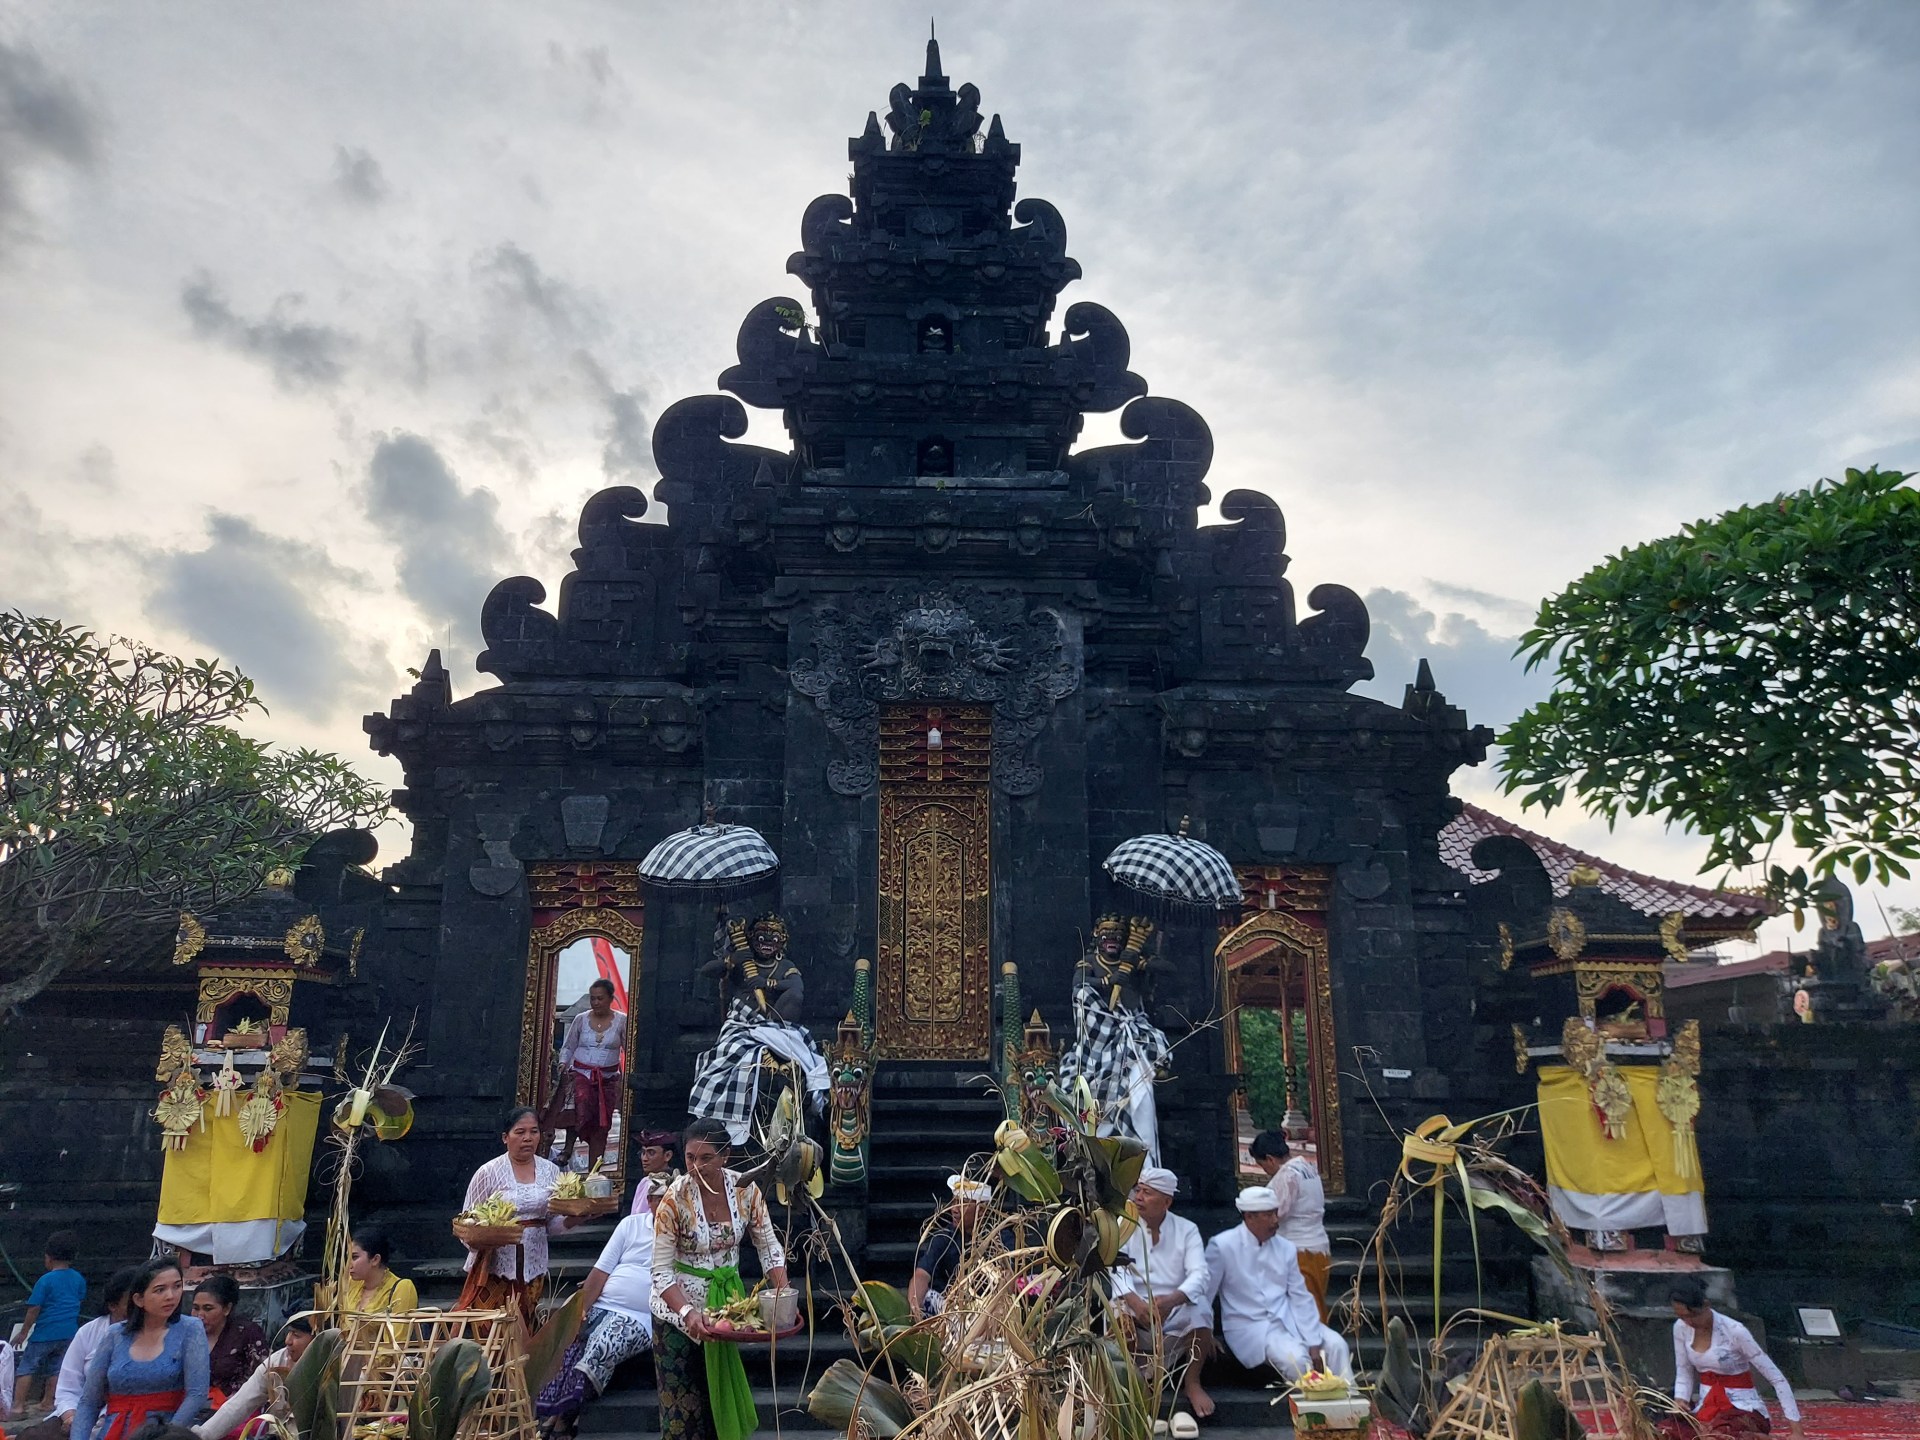 Outside Bali, Indonesia’s Hindus celebrate Nyepi in intimate ceremonies